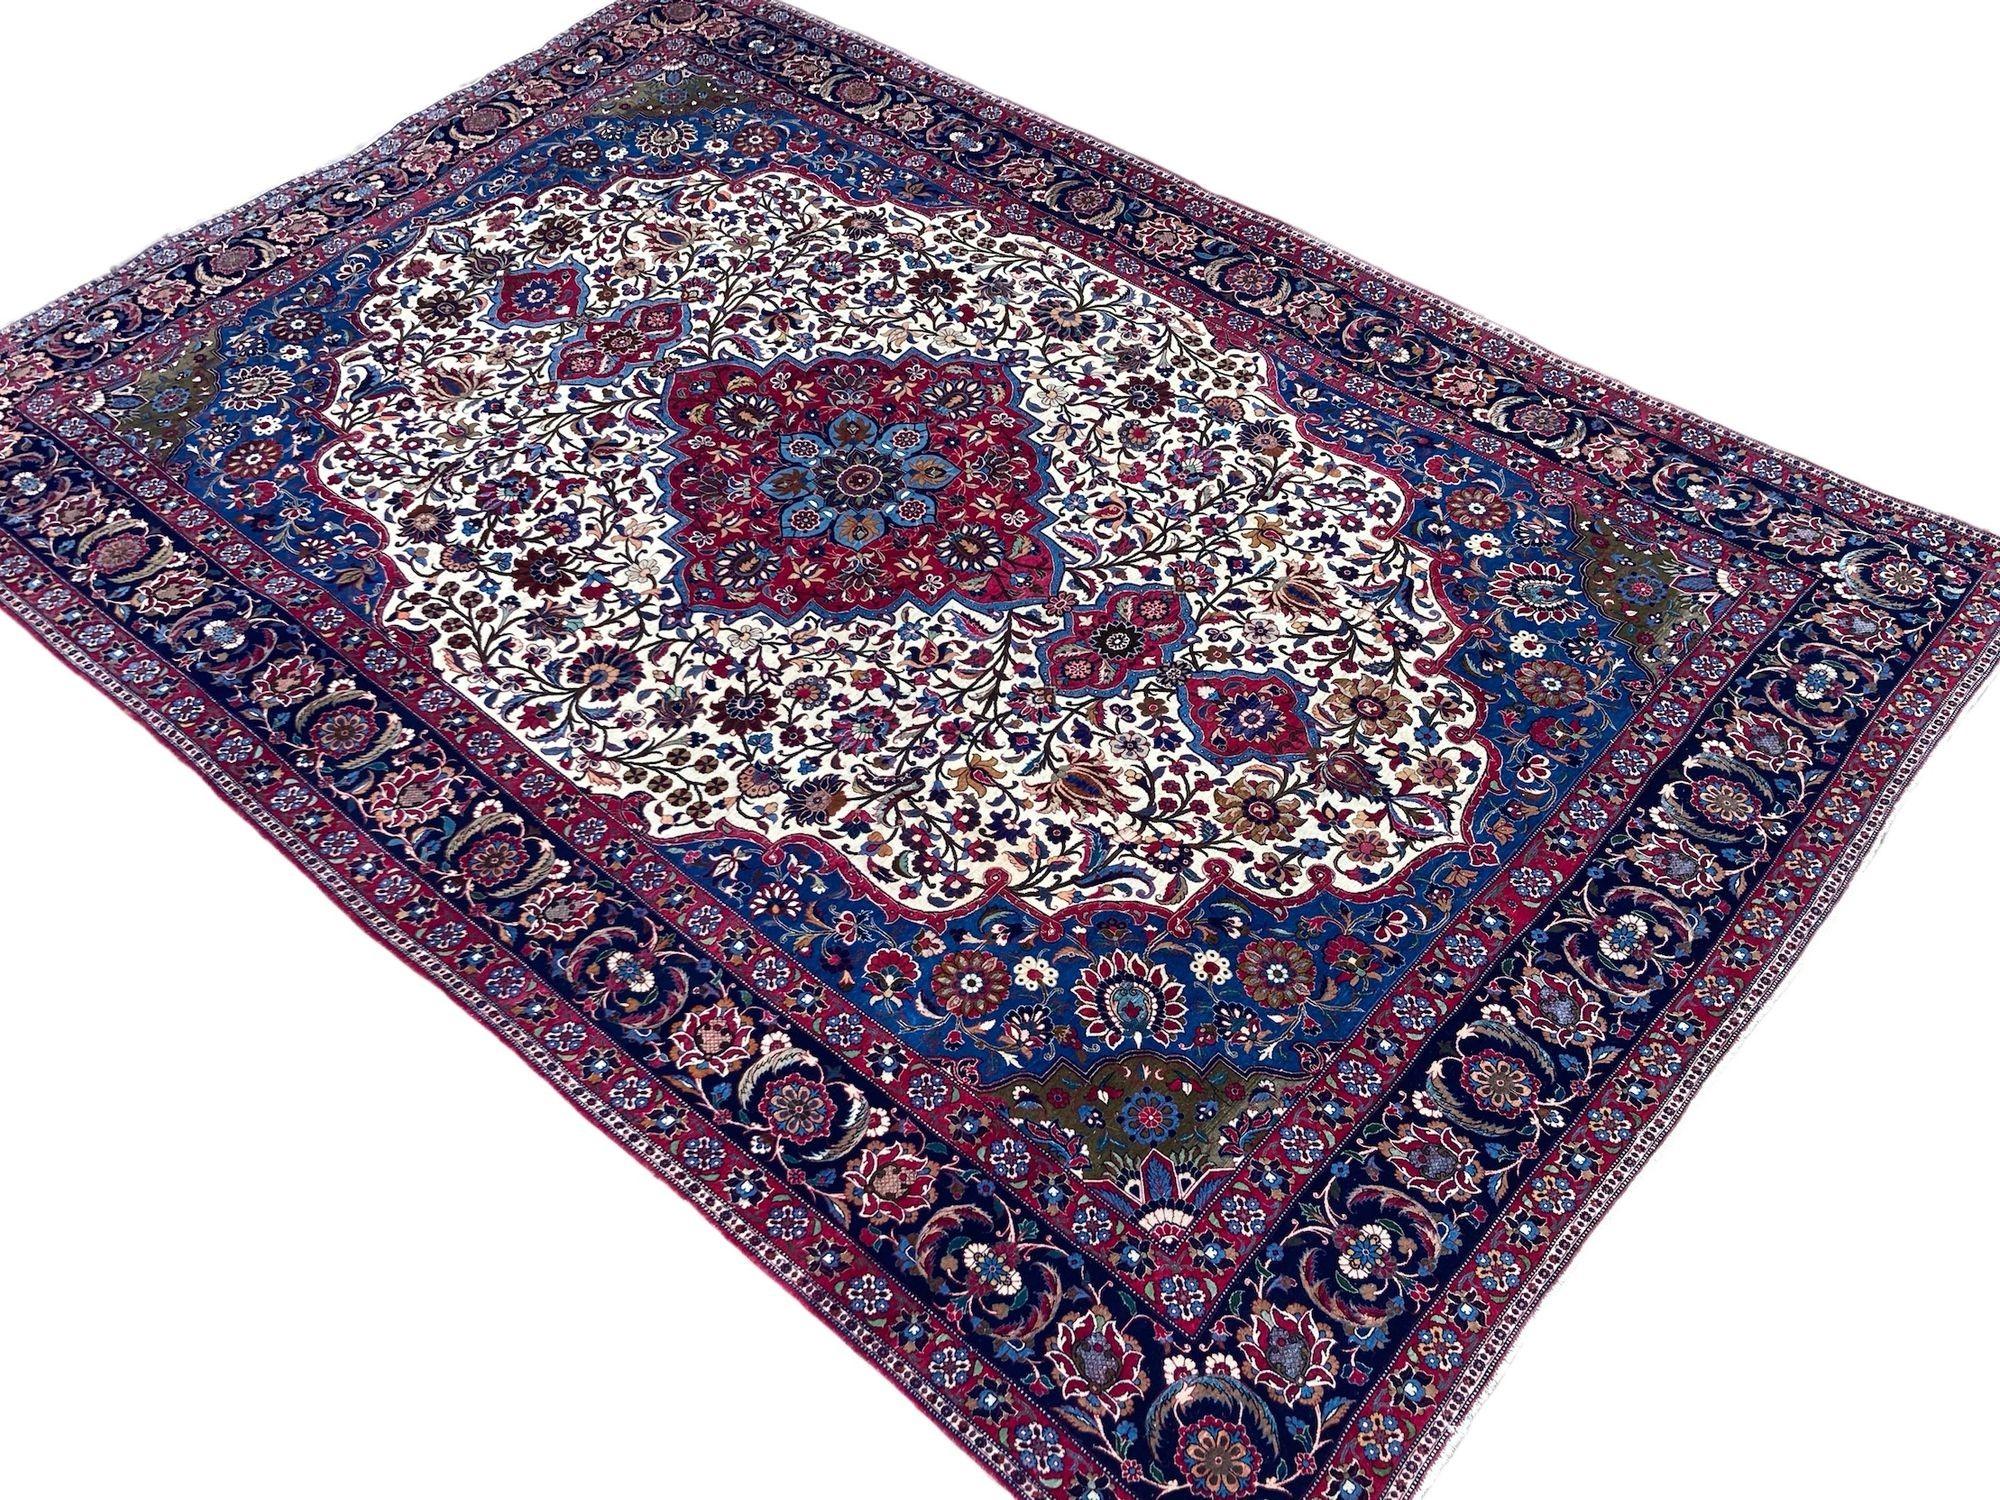 Antique Wool & Silk Isfahan Carpet 3.43m x 2.33m In Good Condition For Sale In St. Albans, GB